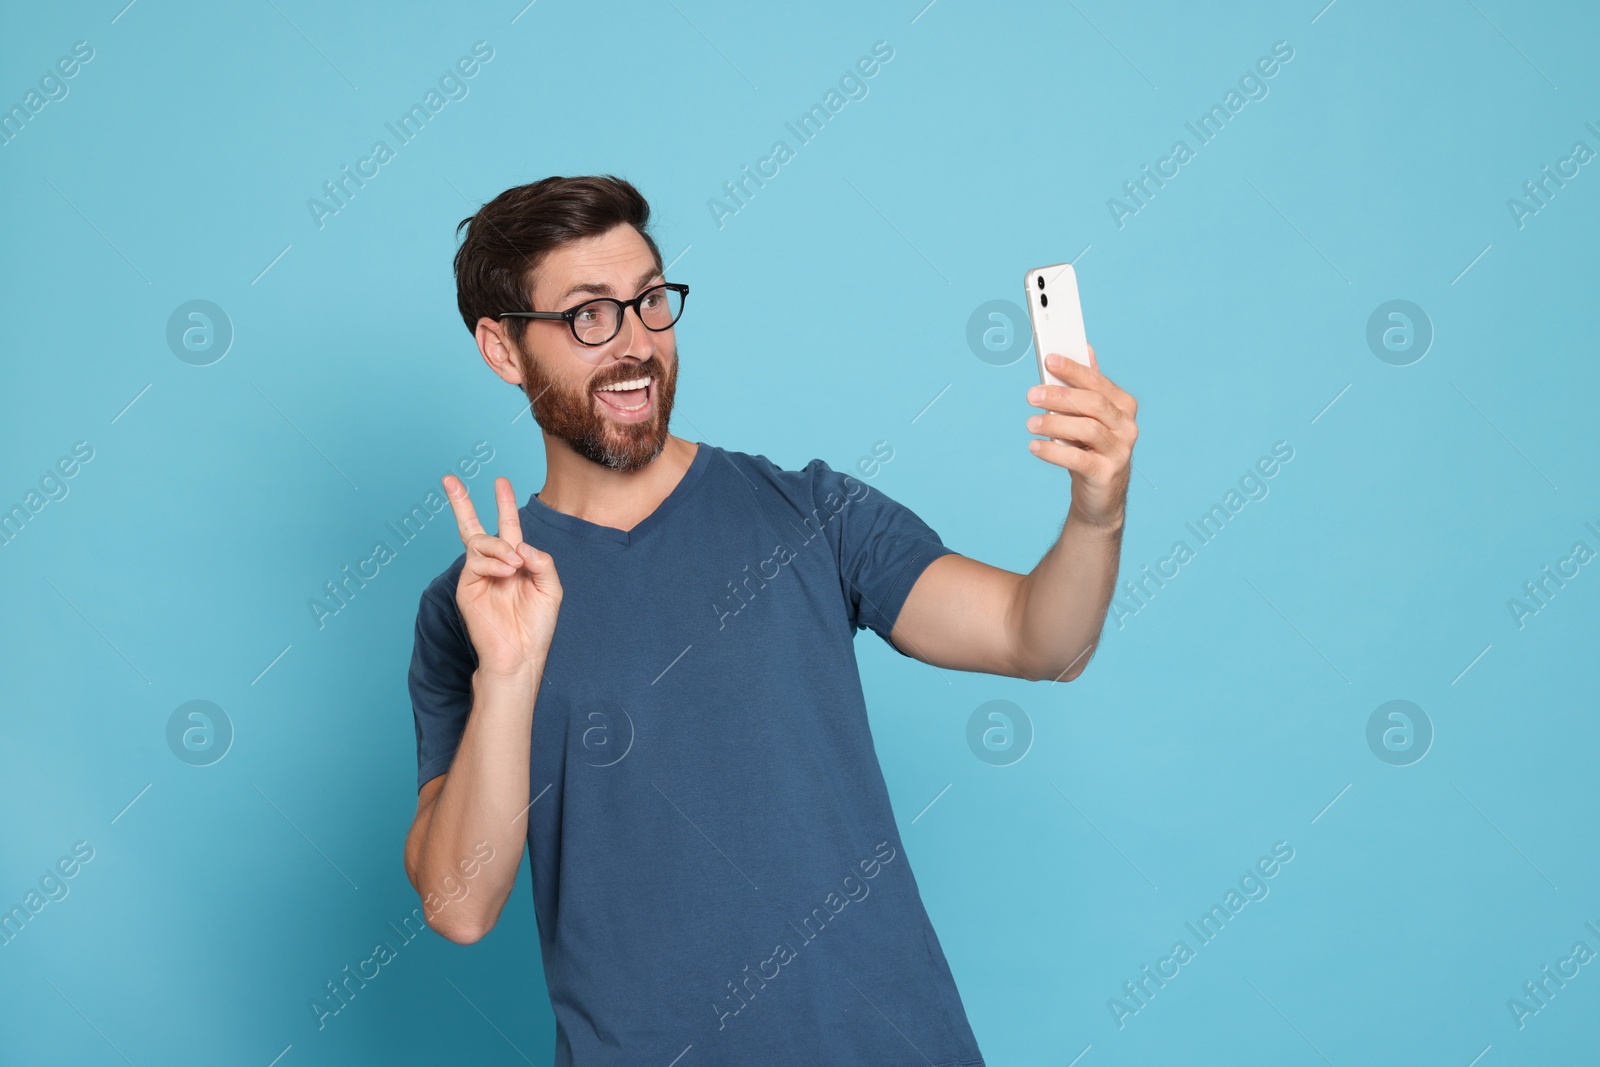 Photo of Happy man taking selfie with smartphone on light blue background